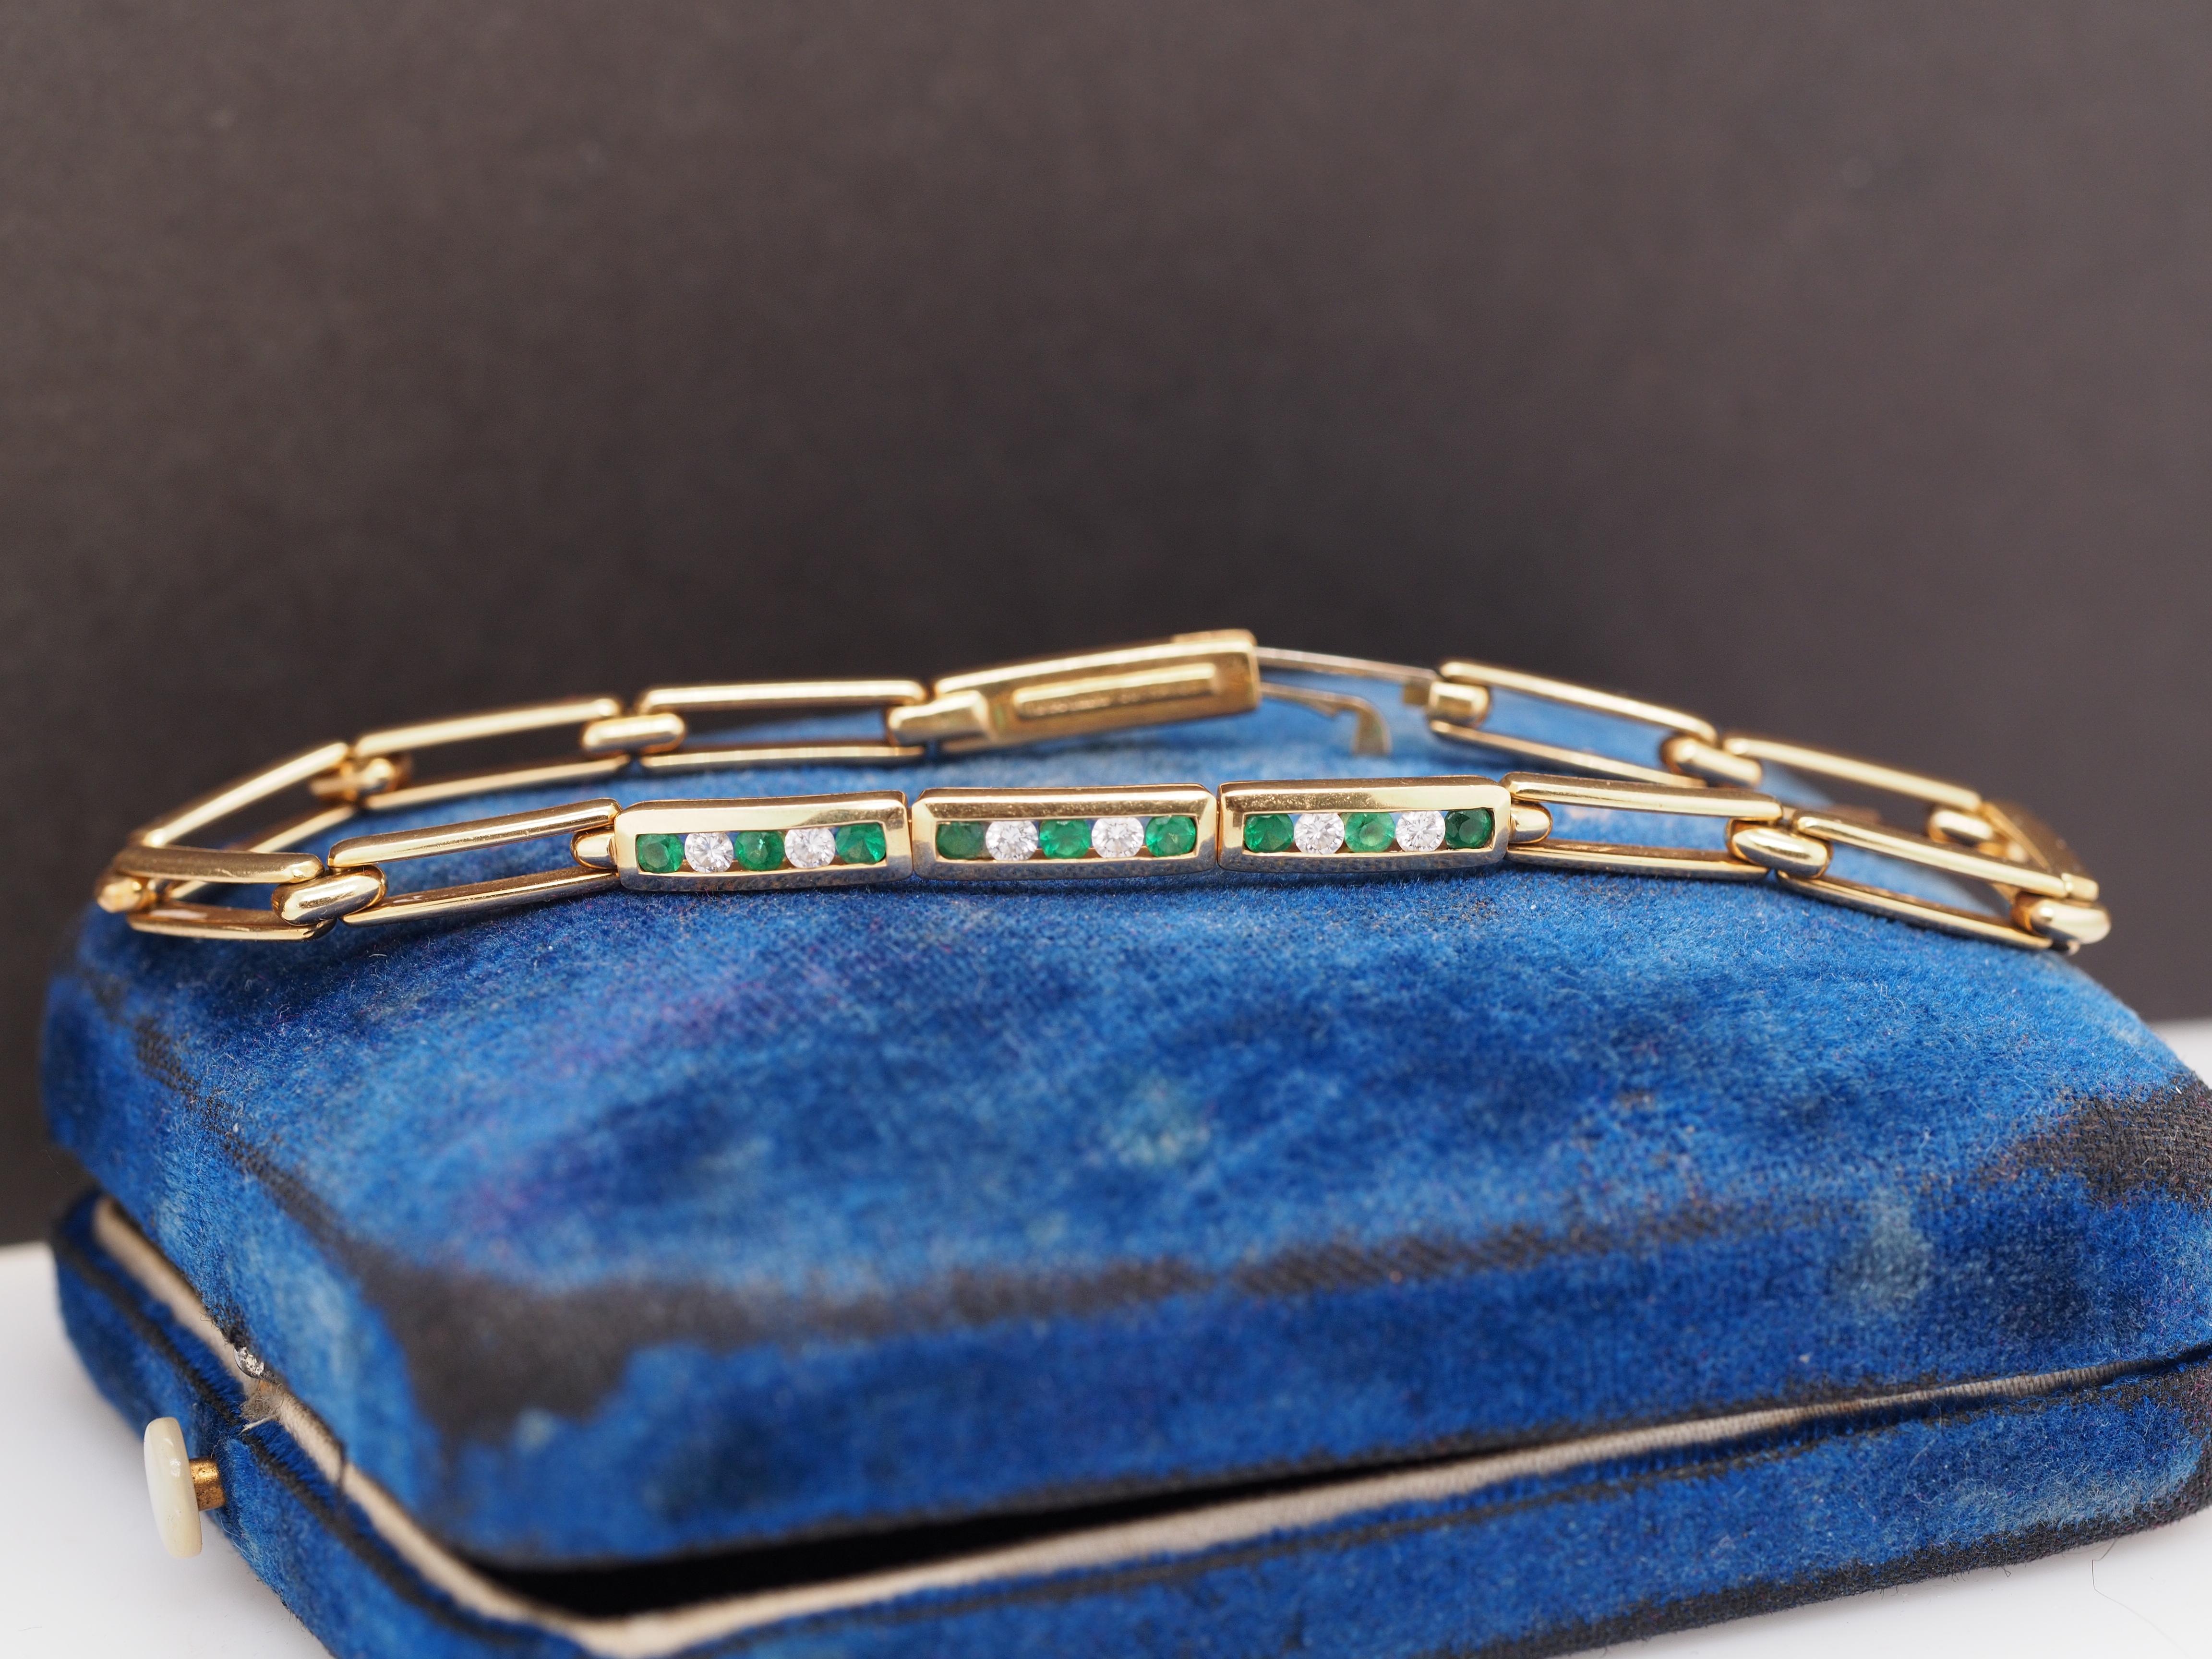 Year: 1970s
Item Details:
Maker: Tiffany & Co (France) - Hallmarked on clasp.
Metal Type: 18K Yellow Gold [Hallmarked, and Tested]
Weight: 15.6 grams (All Items Total)
Stone Details:
Type: Diamond (natural)
Weight: .25ct total weight
Cut: Round